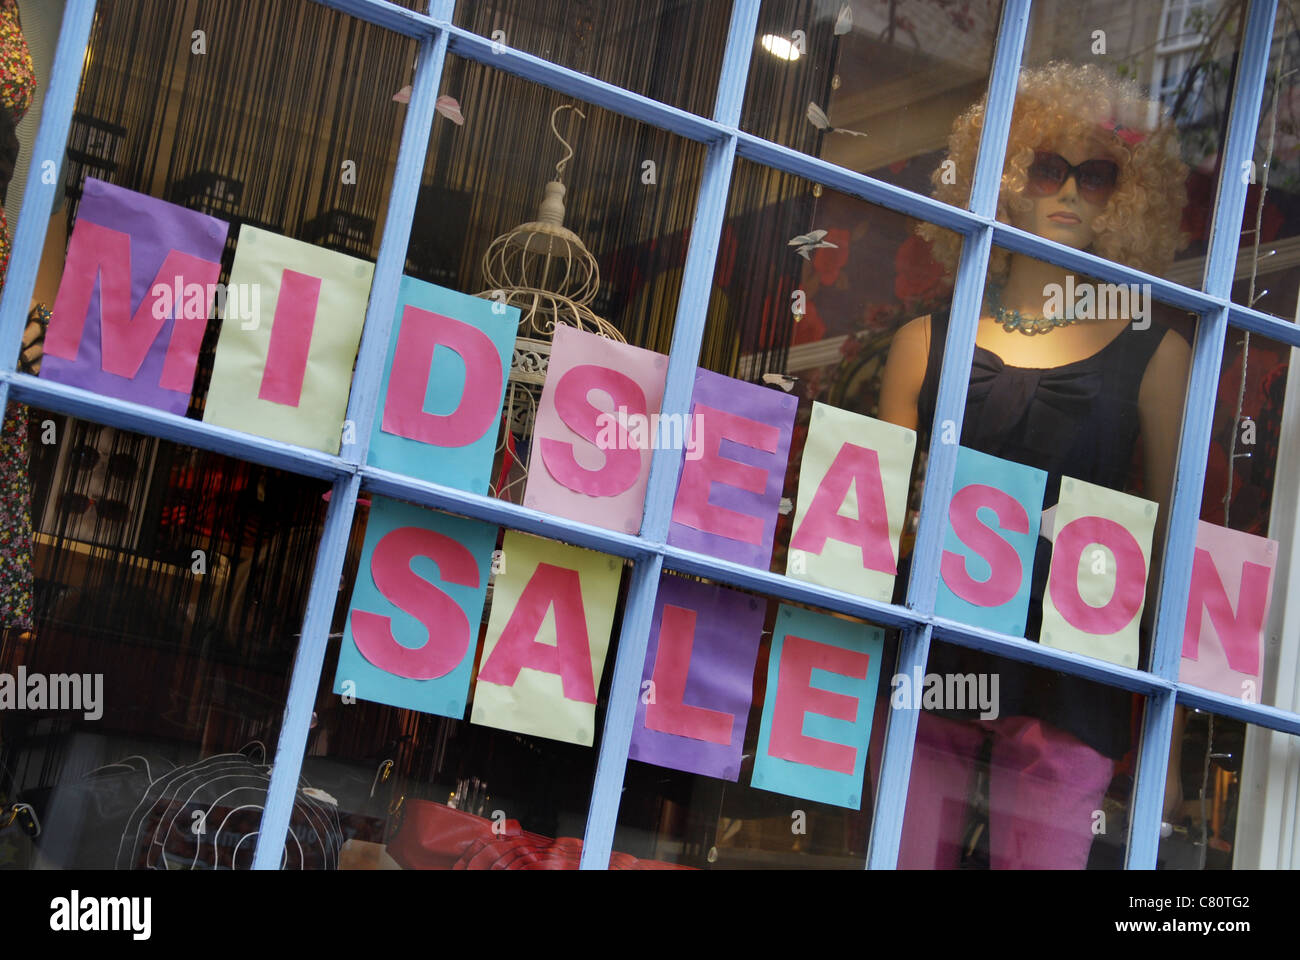 Premium Photo  Soldes french text means sale sign in clothing store on  rack display